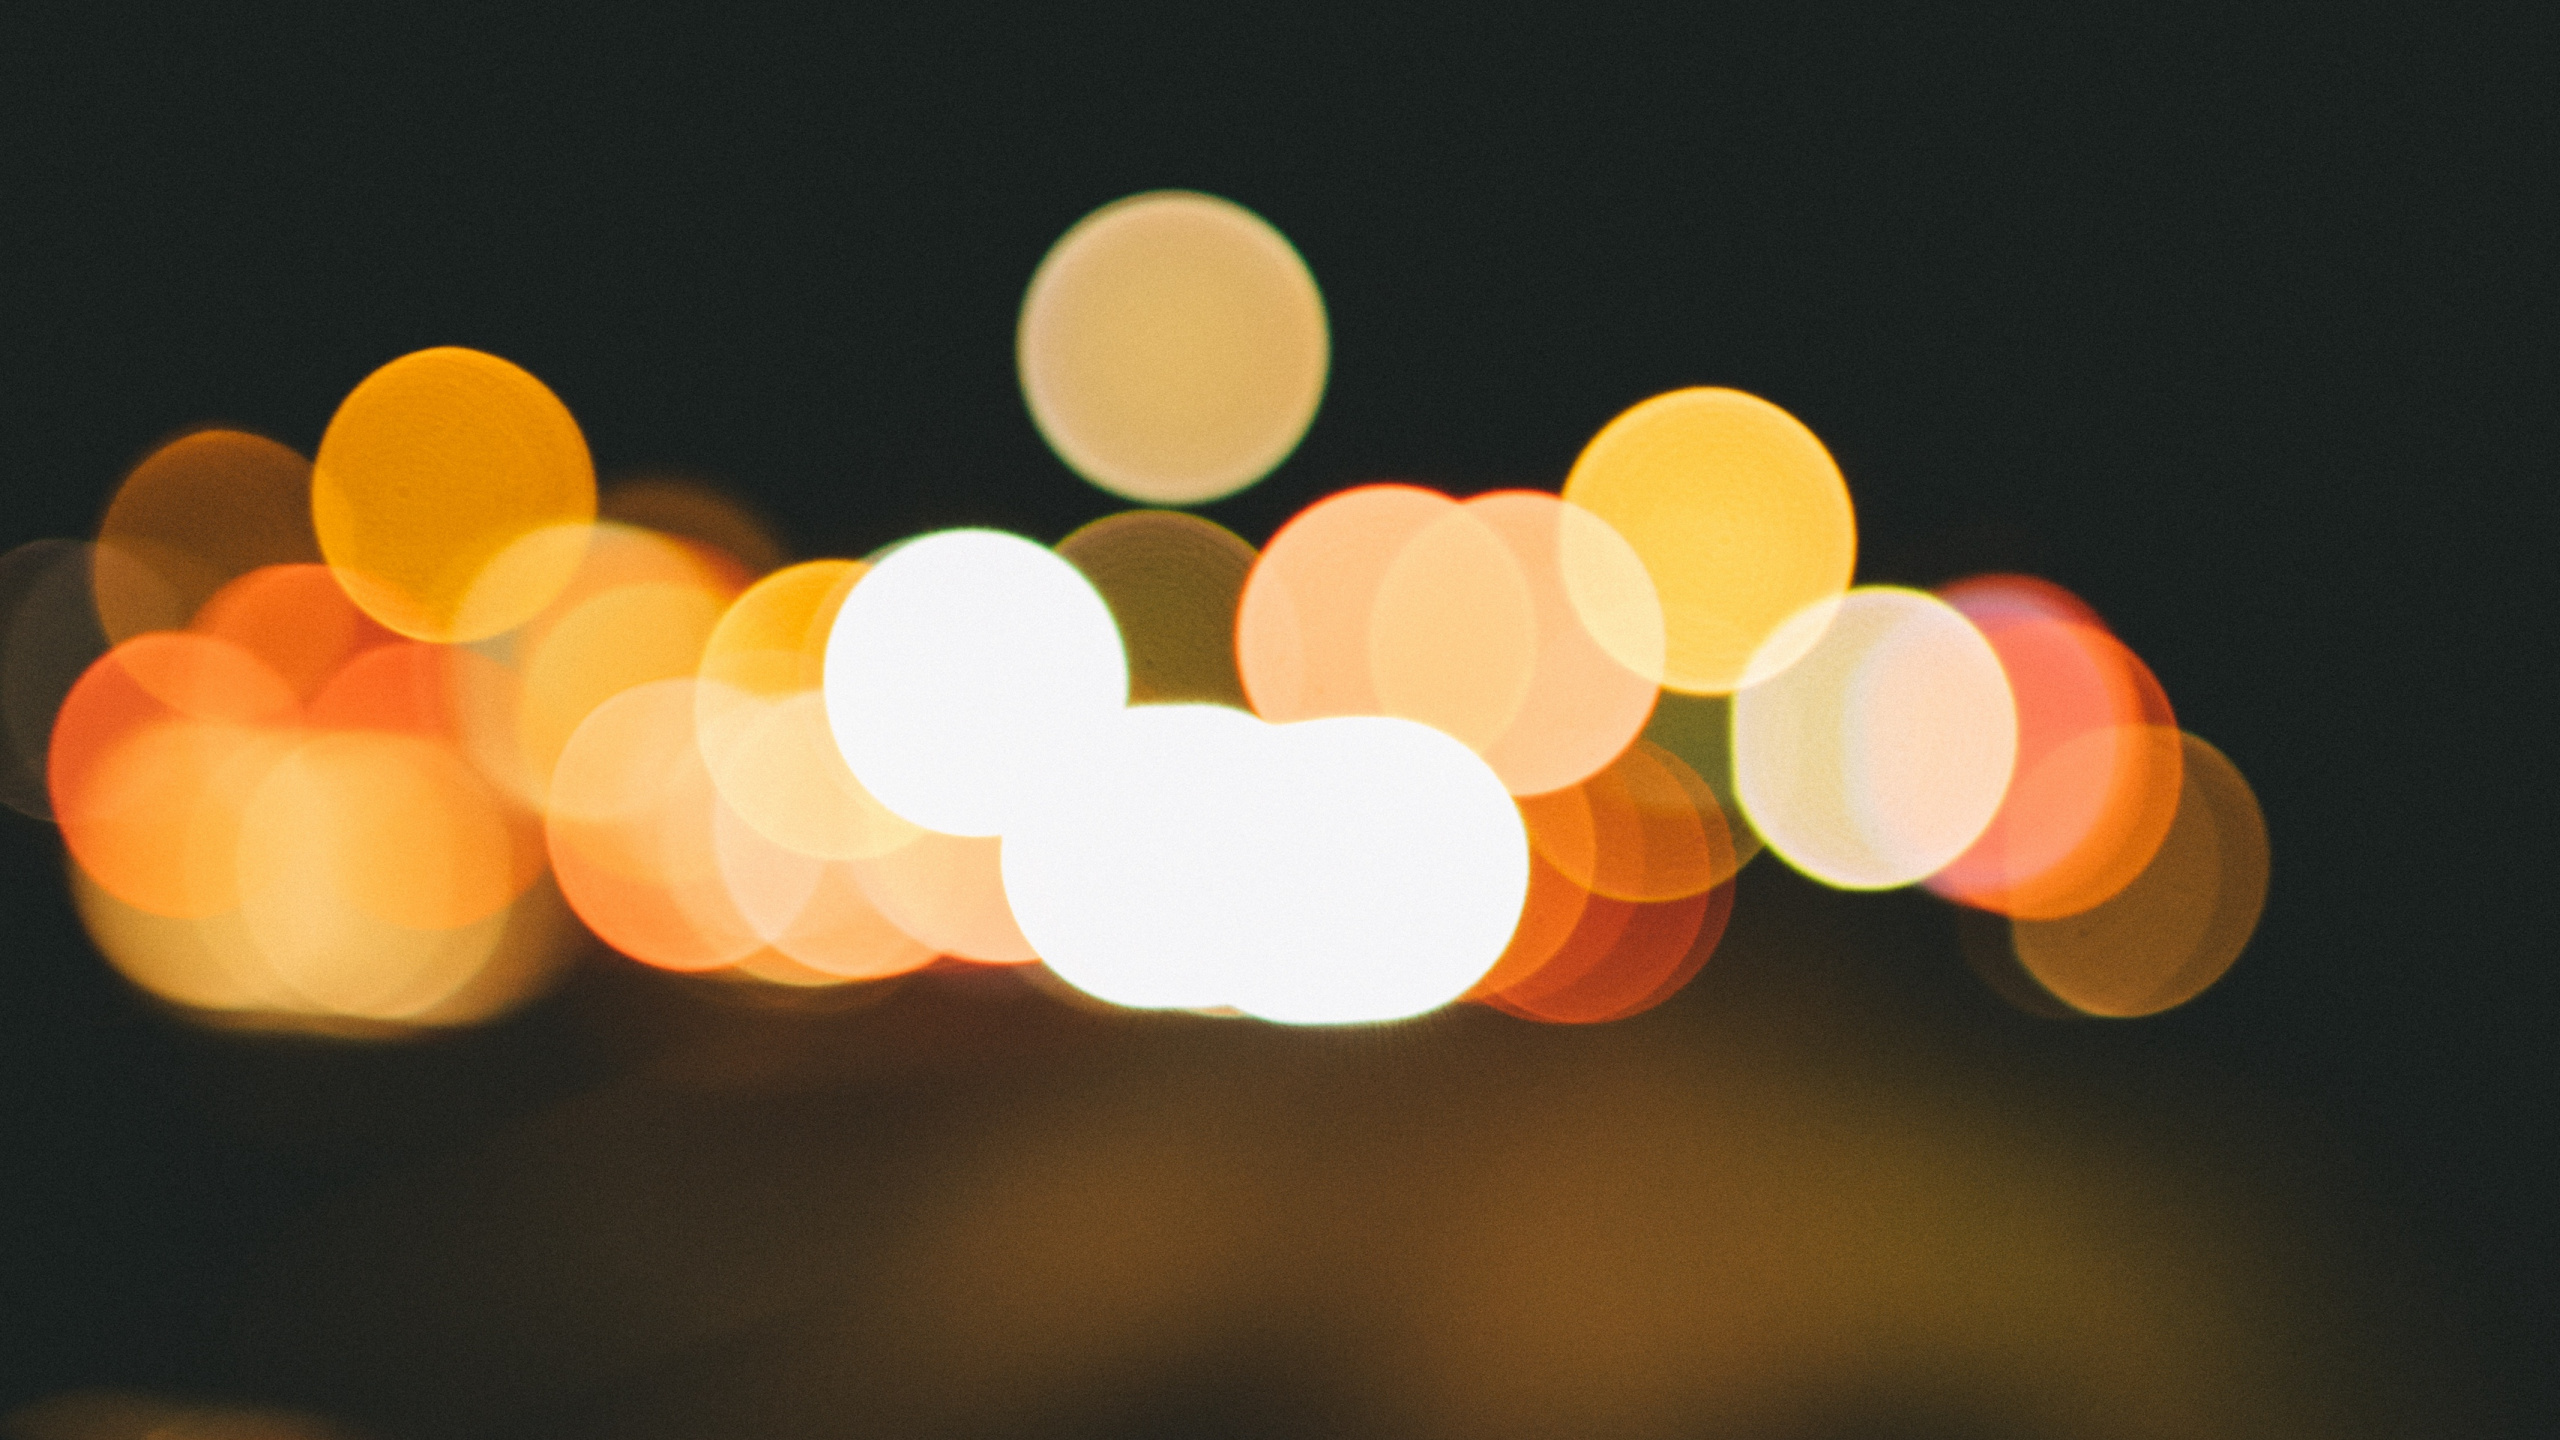 Bokeh Photography of Yellow Lights. Wallpaper in 2560x1440 Resolution